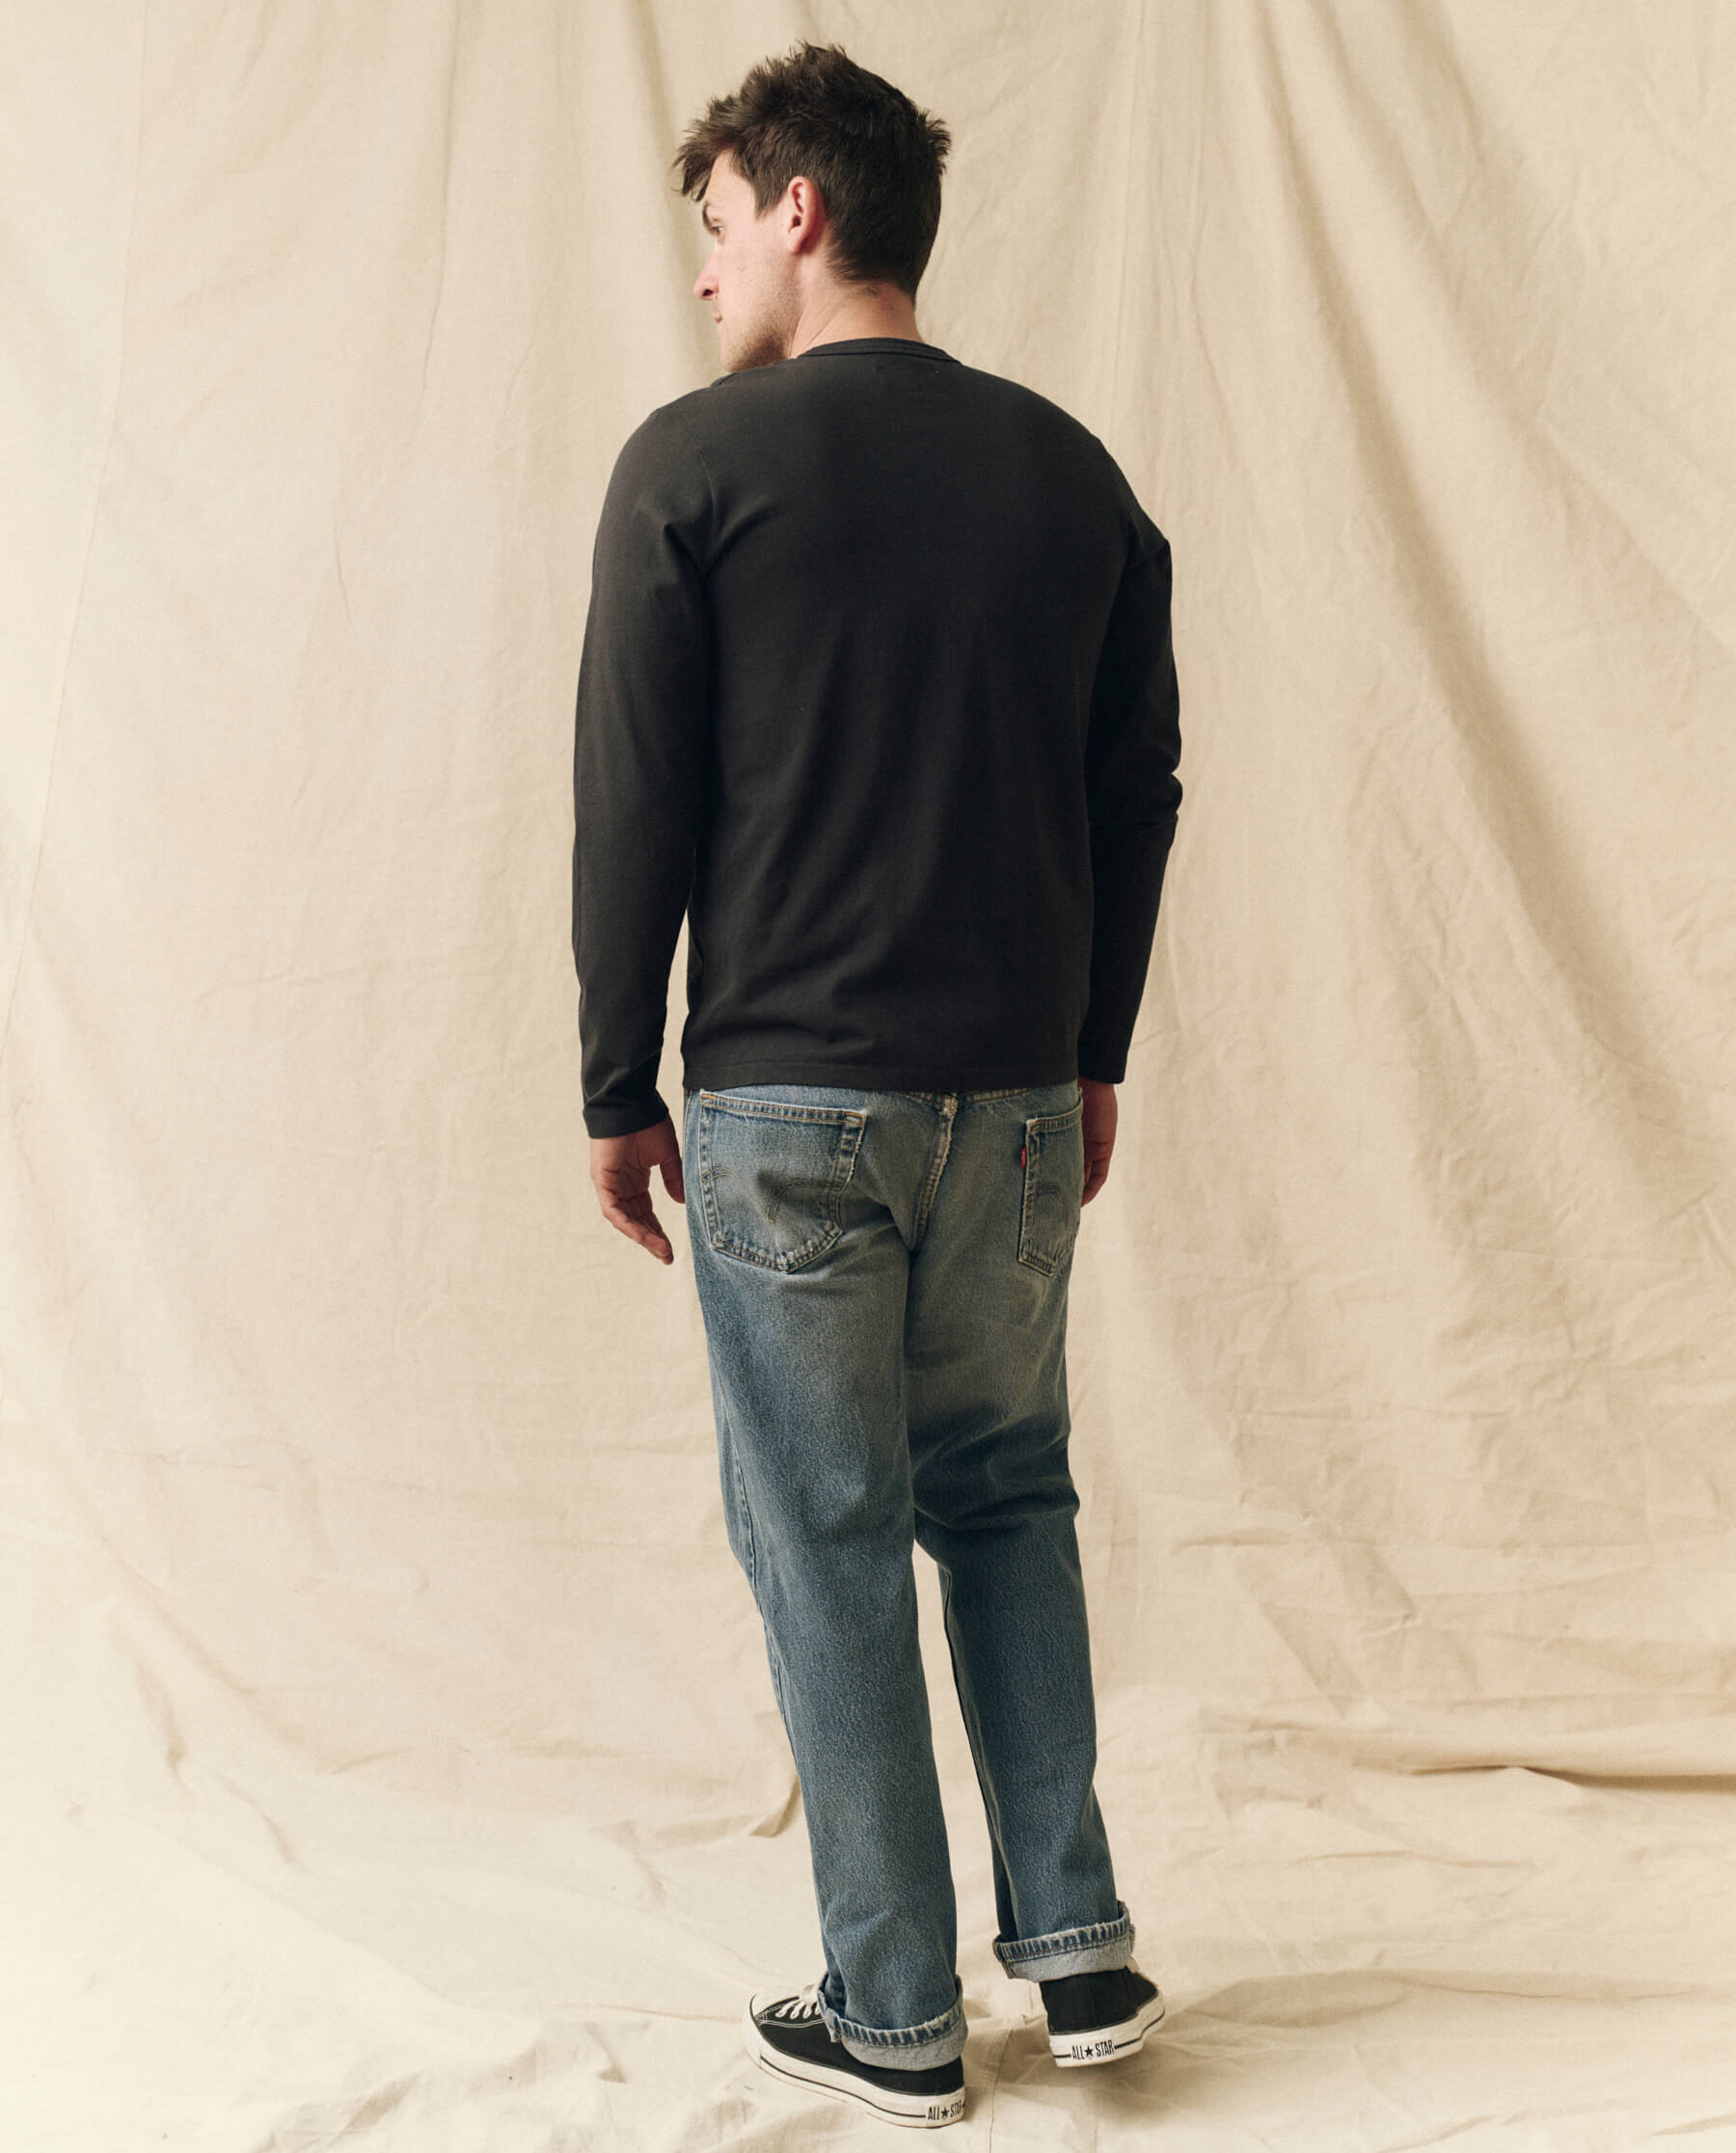 The Men's Pure Knits Long Sleeve Slim Crew. Solid -- Almost Black